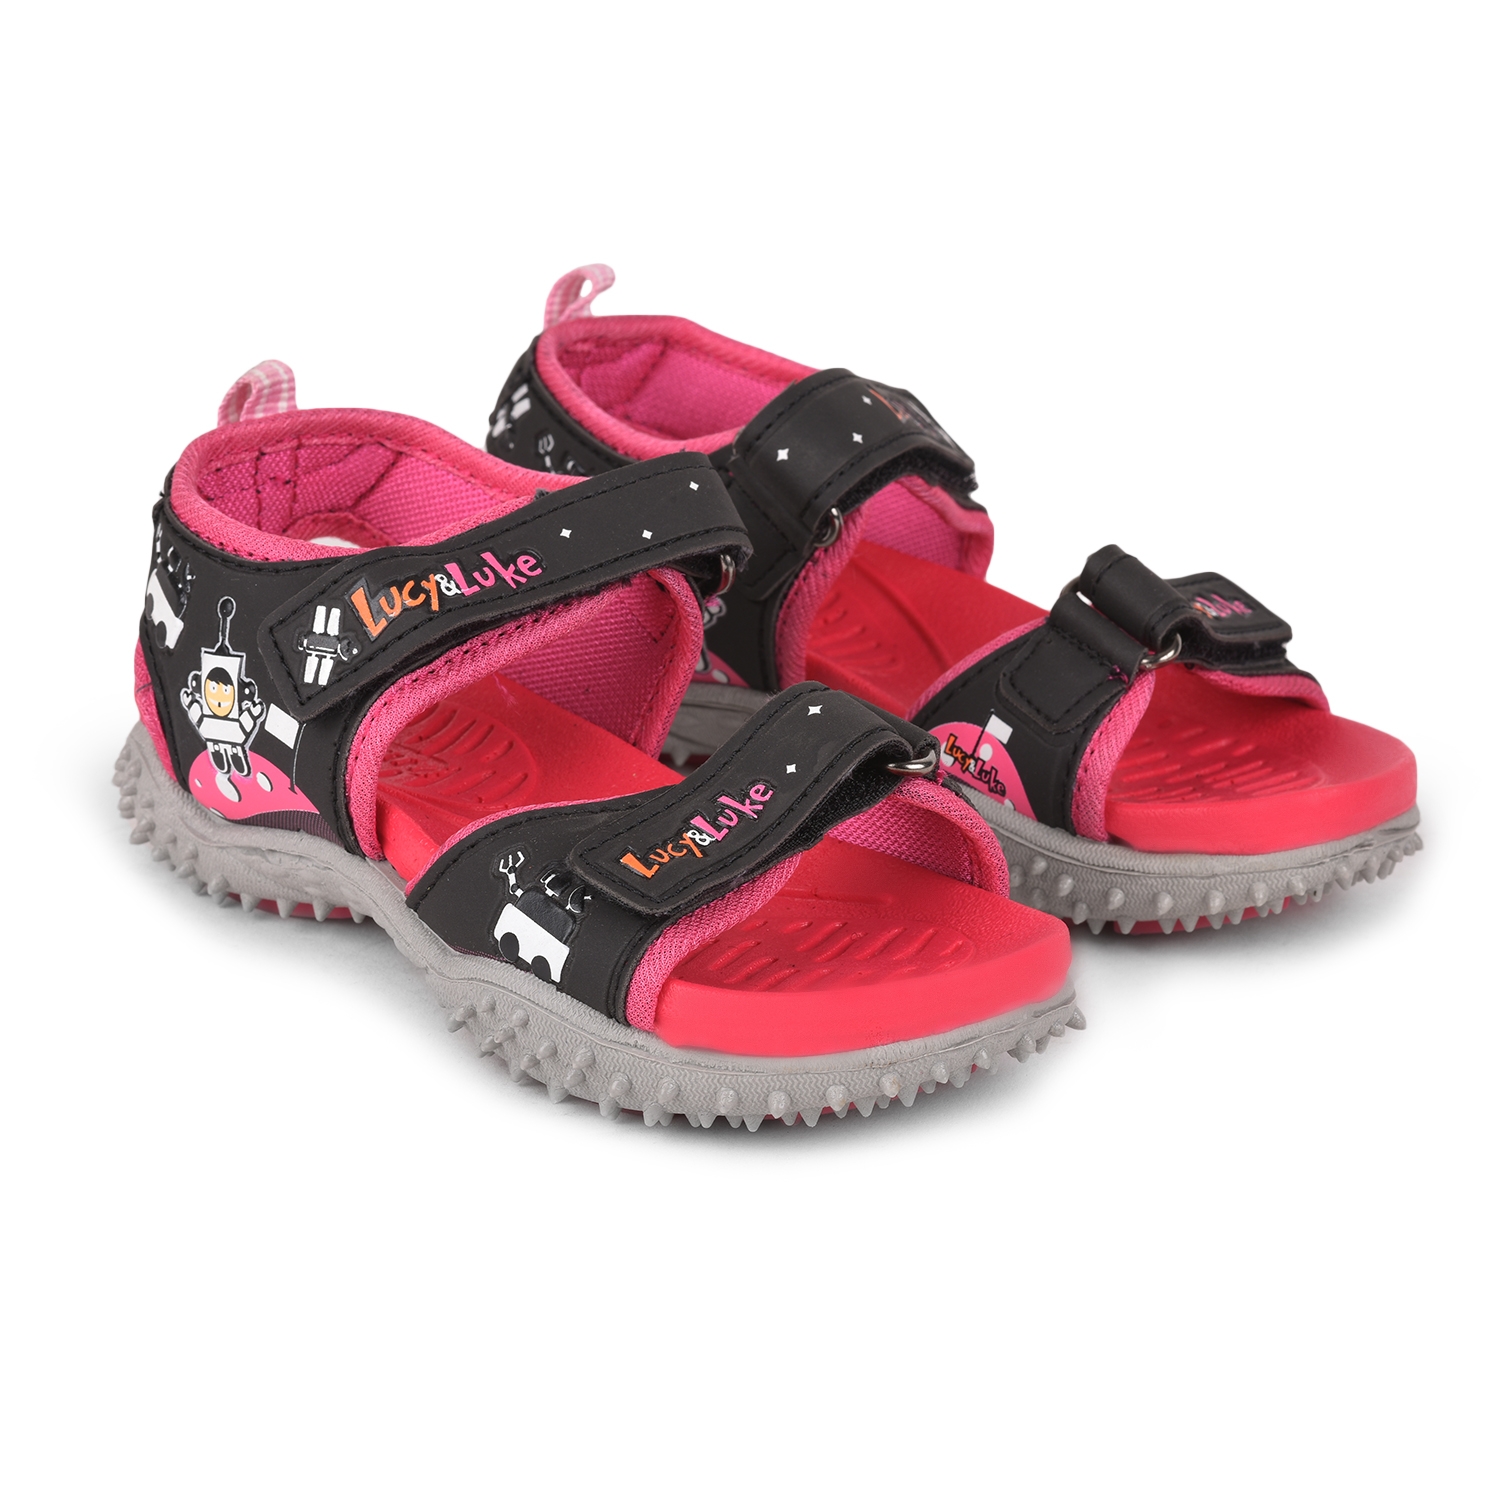 Lucy & Luke by Liberty RICO-19 Pink Sandals for Kids